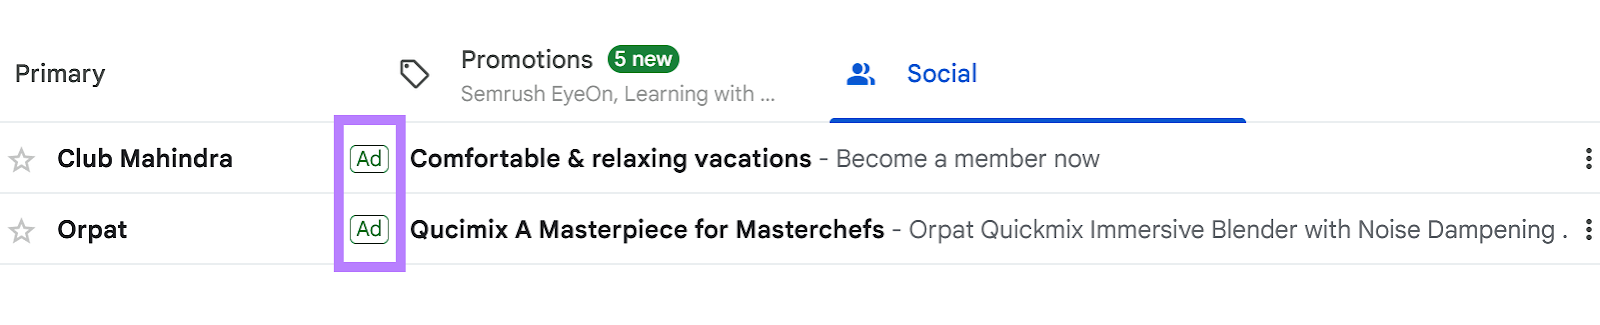 Gmail ads shown in the inbox with "Ad" labels